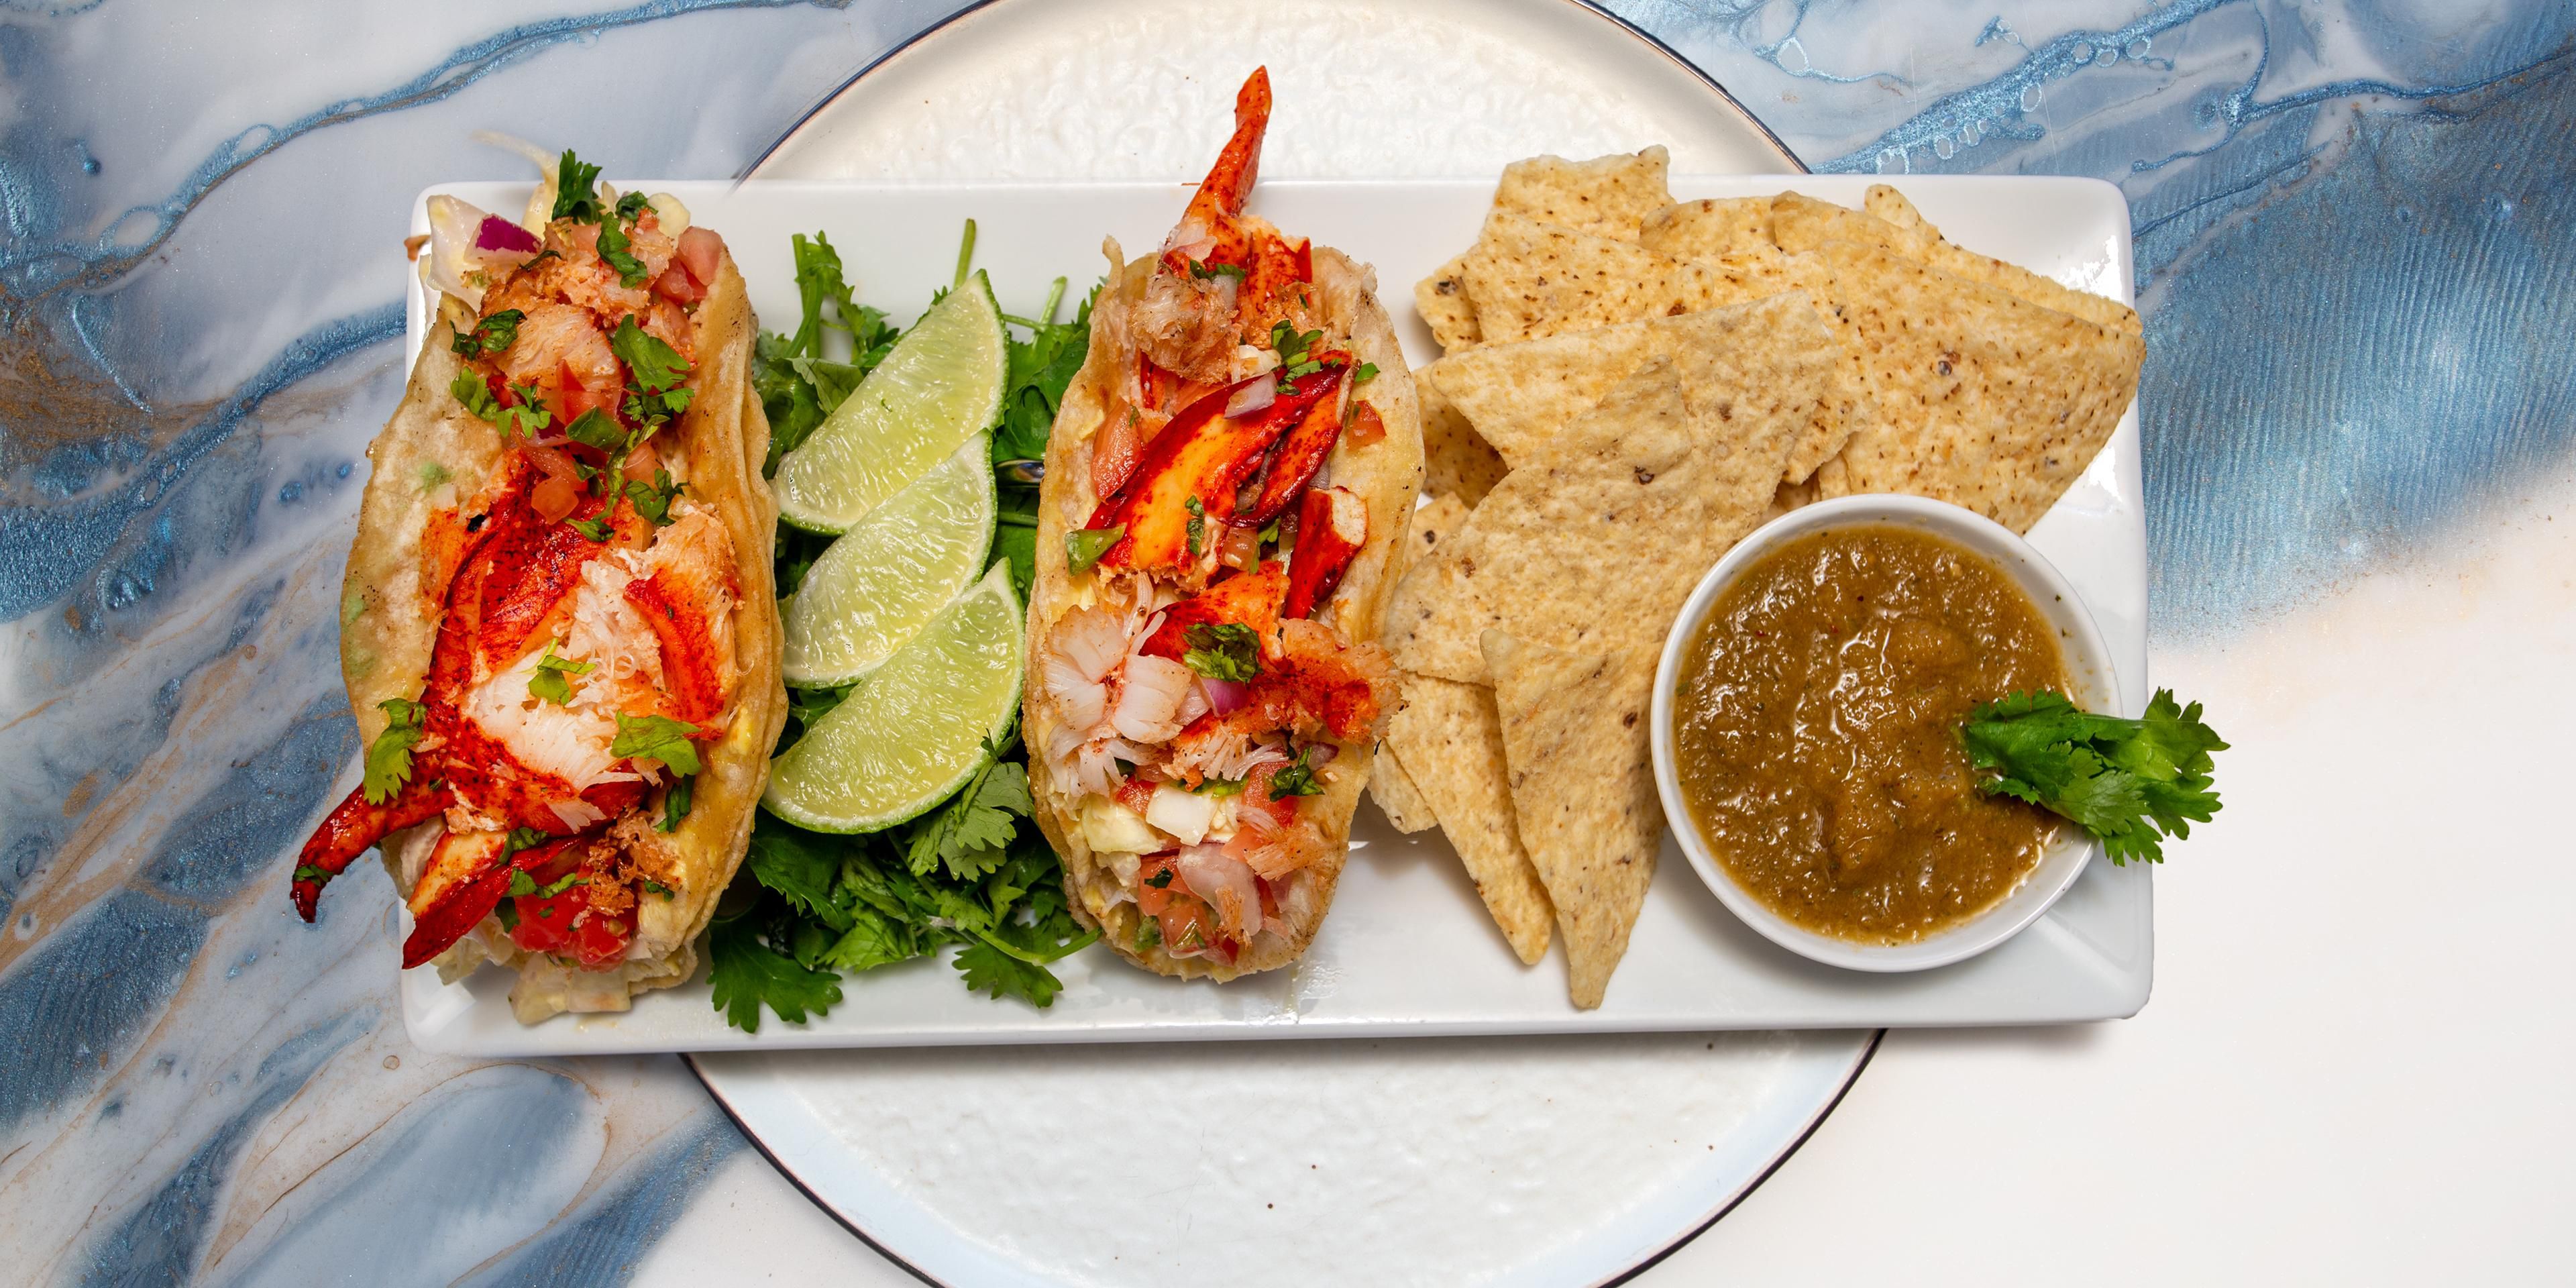 Make every day Taco Tuesday at BLVD Bistro in St Augustine.